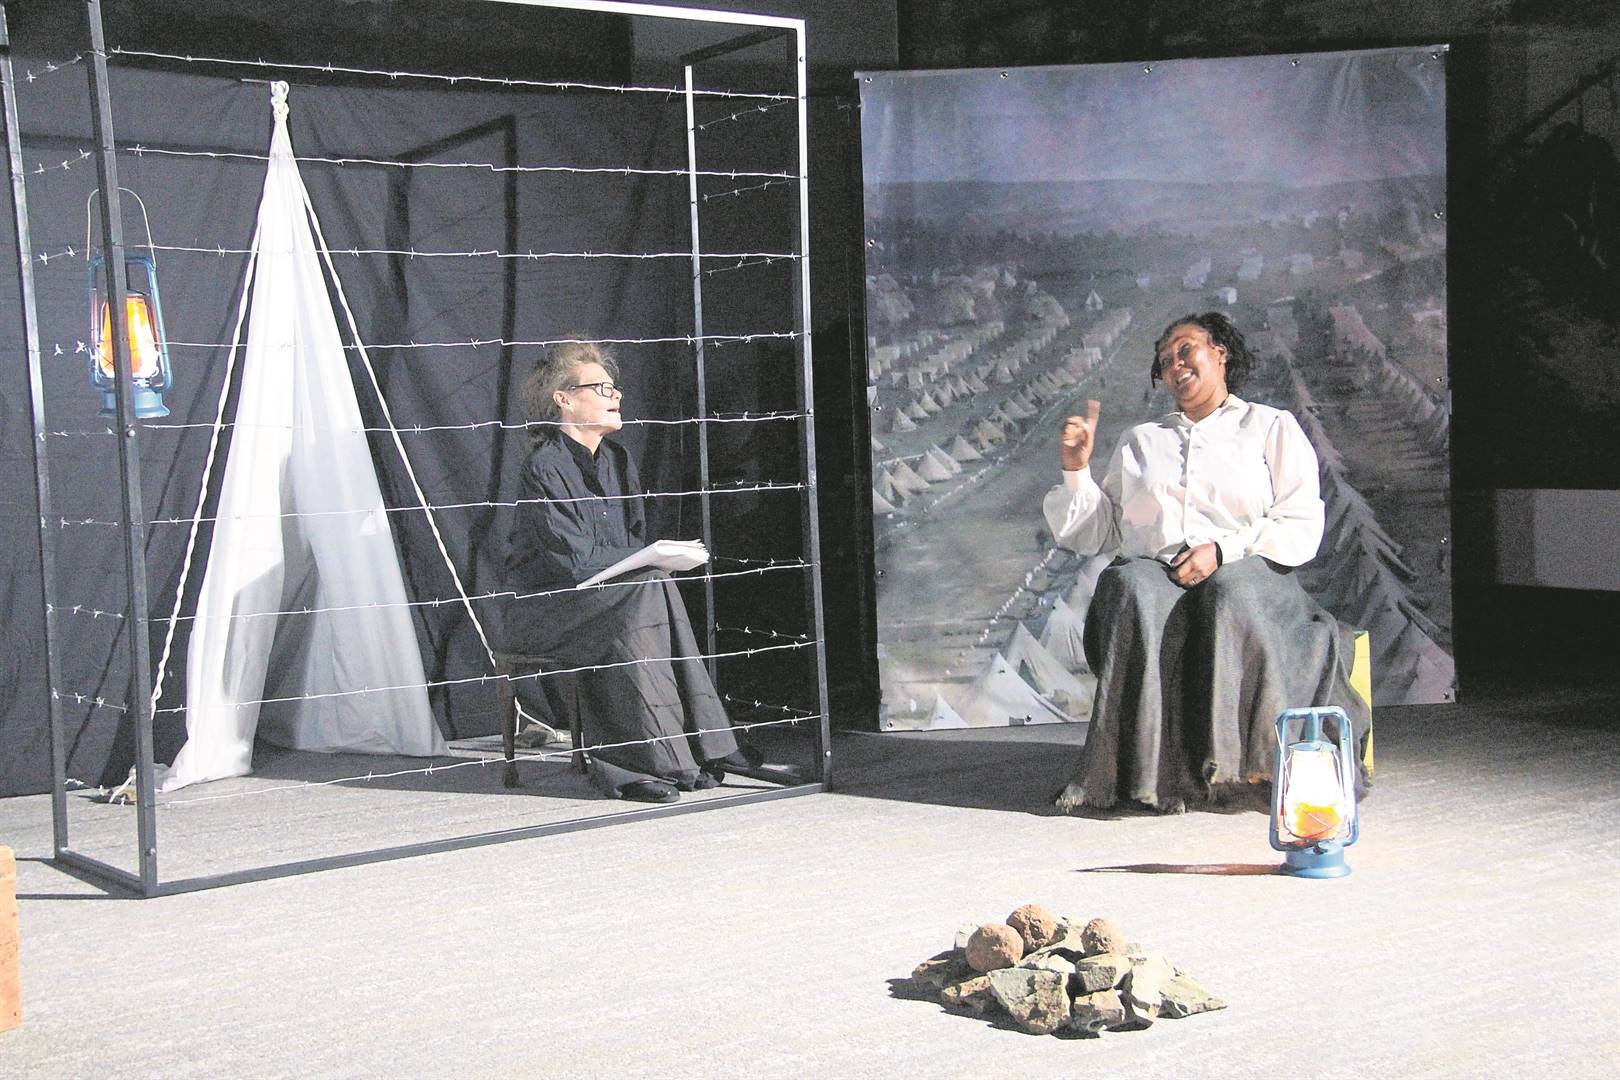 Carin van Deventer (left) in the role of Aletta, and Maria de Koker in the role of Naledi, in the new production The Cage, which was performed for the first time at the War Museum of the Boer Republics on Friday, 19 April. The play was written by Dr André van Deventer and is set in the Bethulie Concentration Camp during the Anglo-Boer War.Photo: Lientjie Mentz